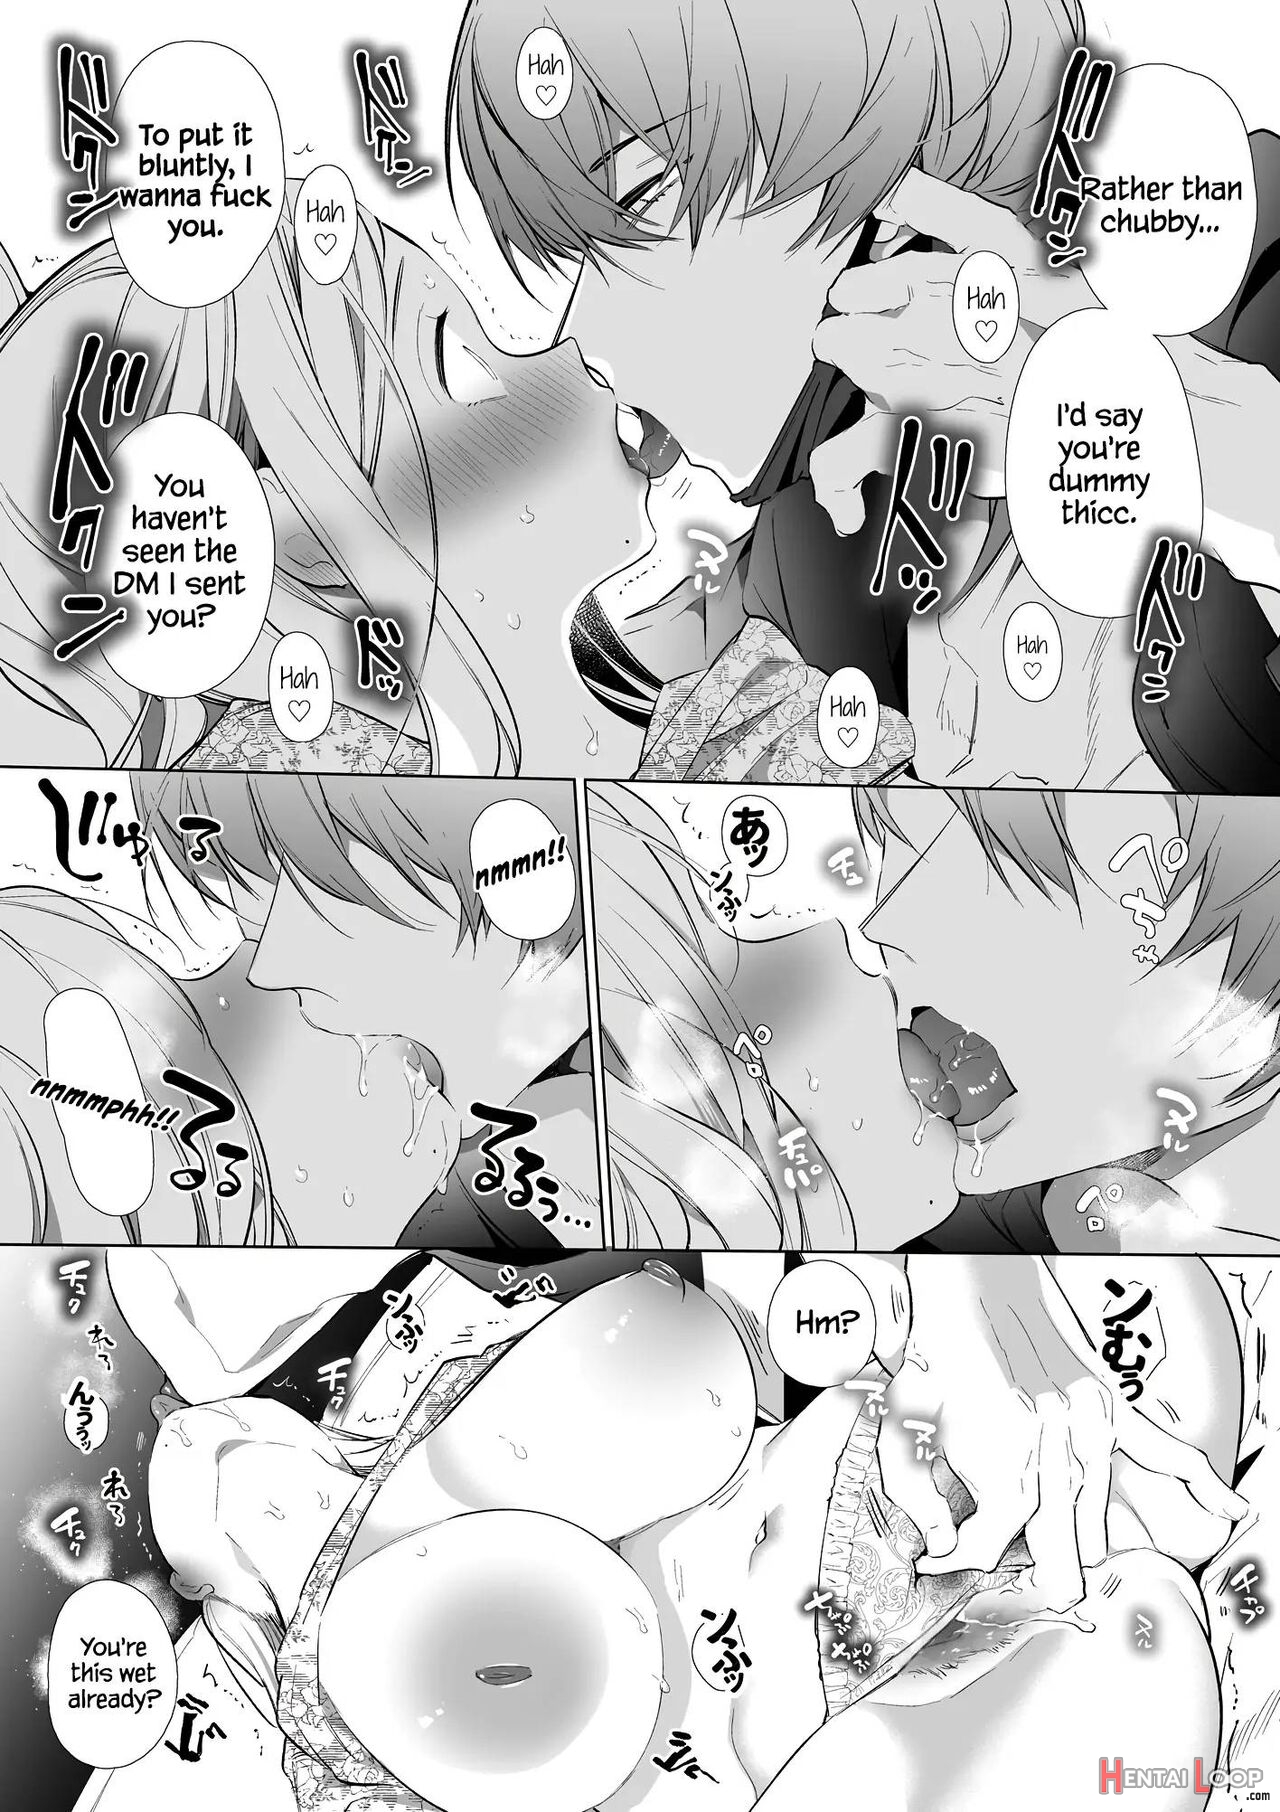 Kana-san Ntr ~ Degradation Of A Housewife By A Guy In An Alter Account ~ page 22